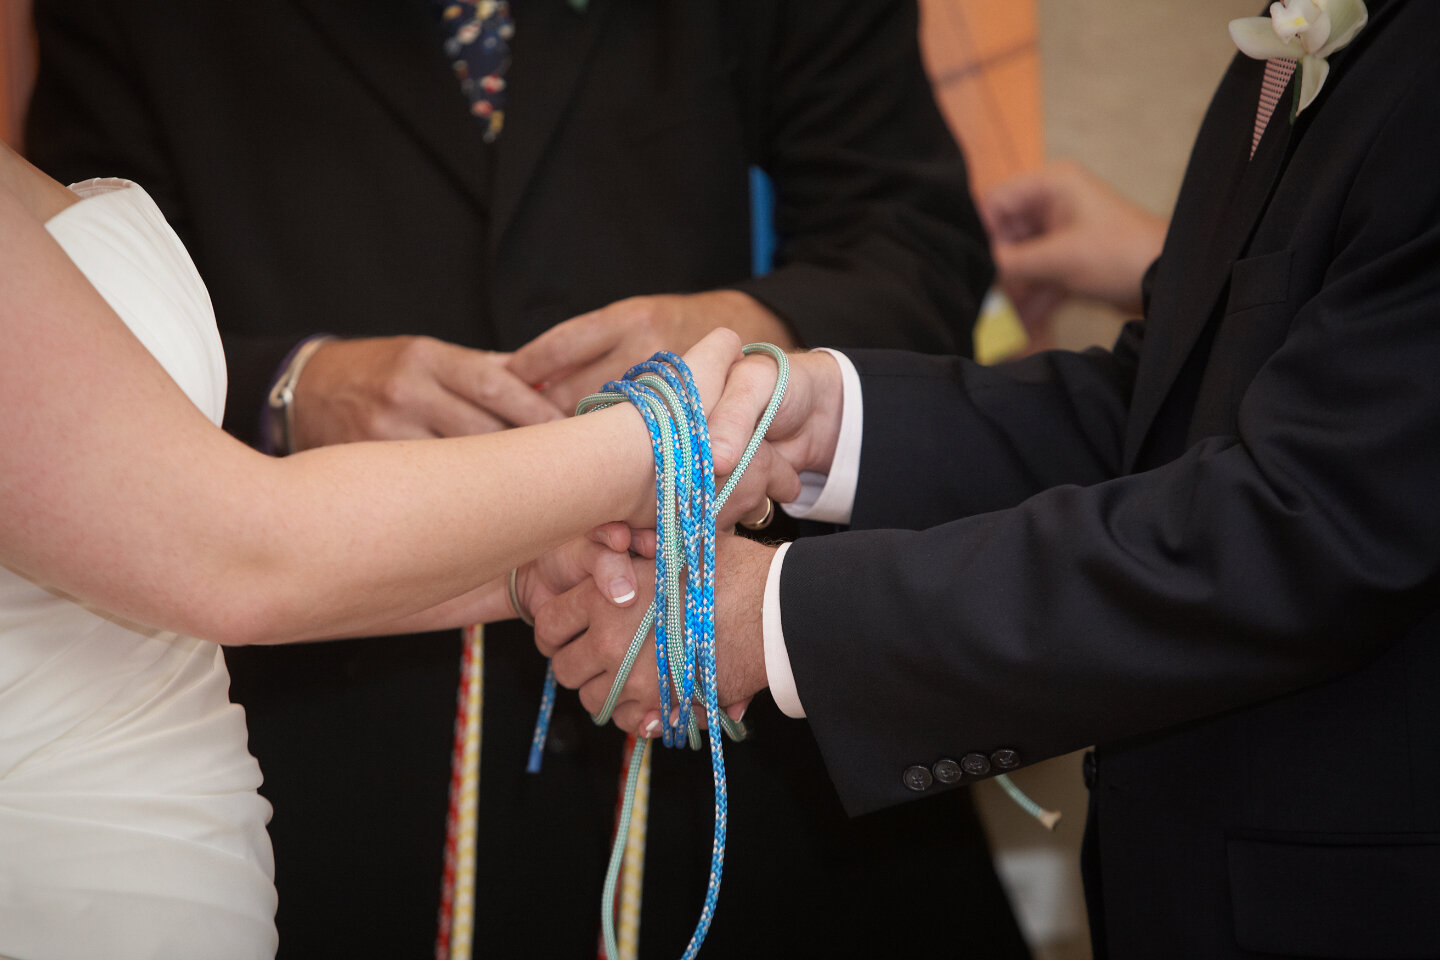 Handfasting Ceremony❤️

At one of my upcoming weddings the couple have chosen a Handfasting ritual.

It's a beautiful element to add, as is also an opportunity to include close friends or family in part of the ceremony.

Originating from ancient Celt